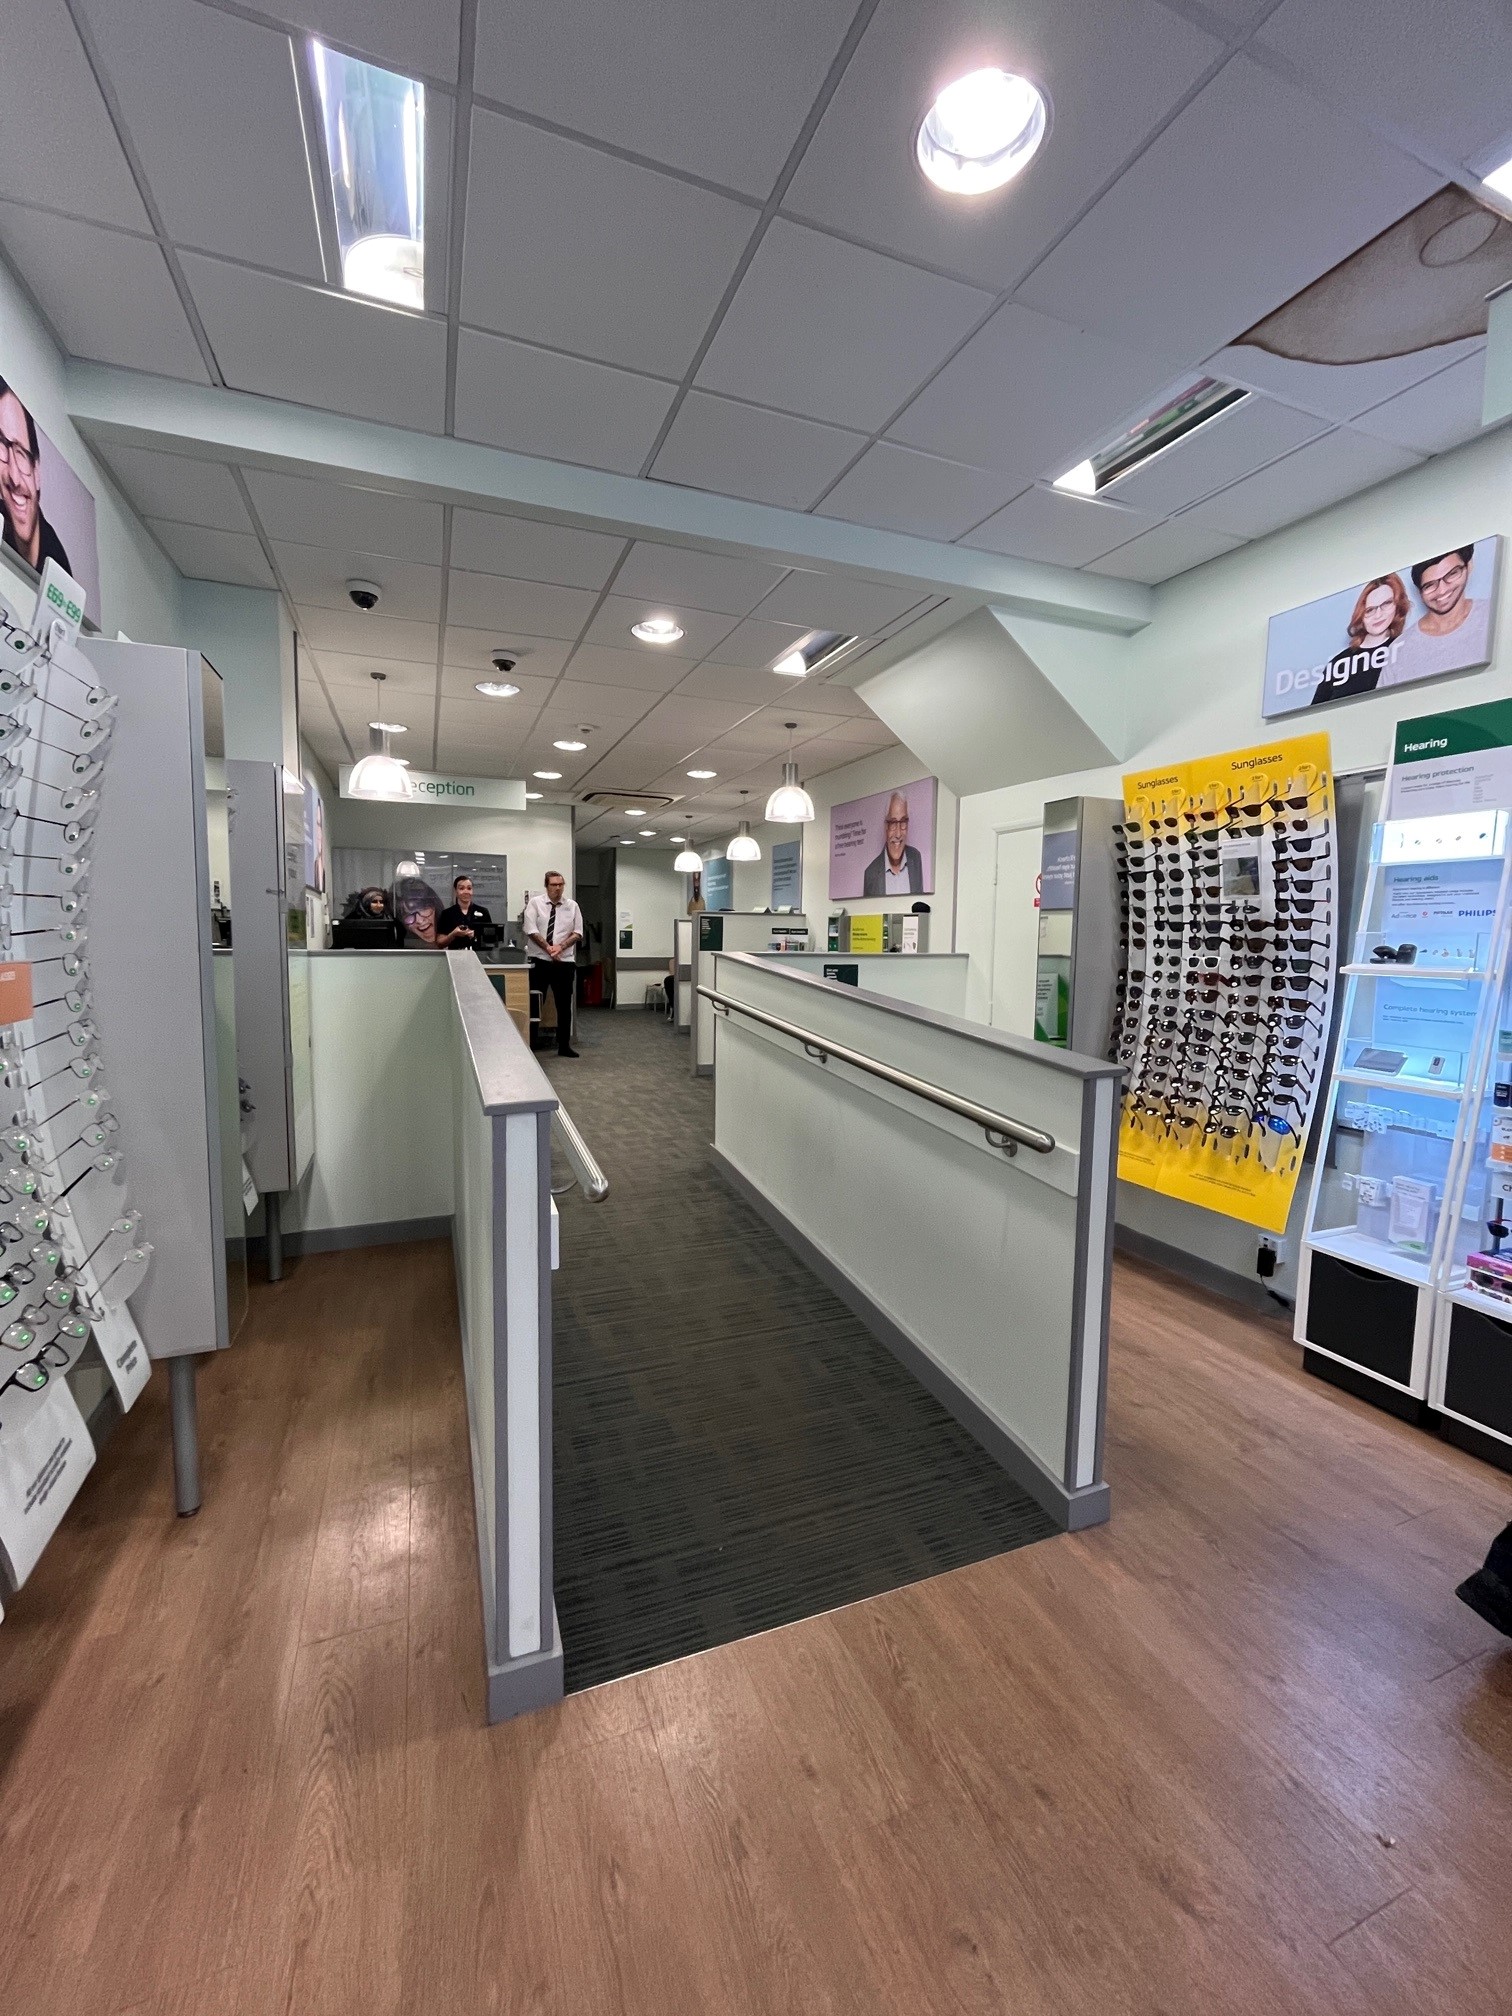 Specsavers Opticians and Audiologists - Swadlincote Specsavers Opticians and Audiologists - Swadlincote Swadlincote 01283 552211